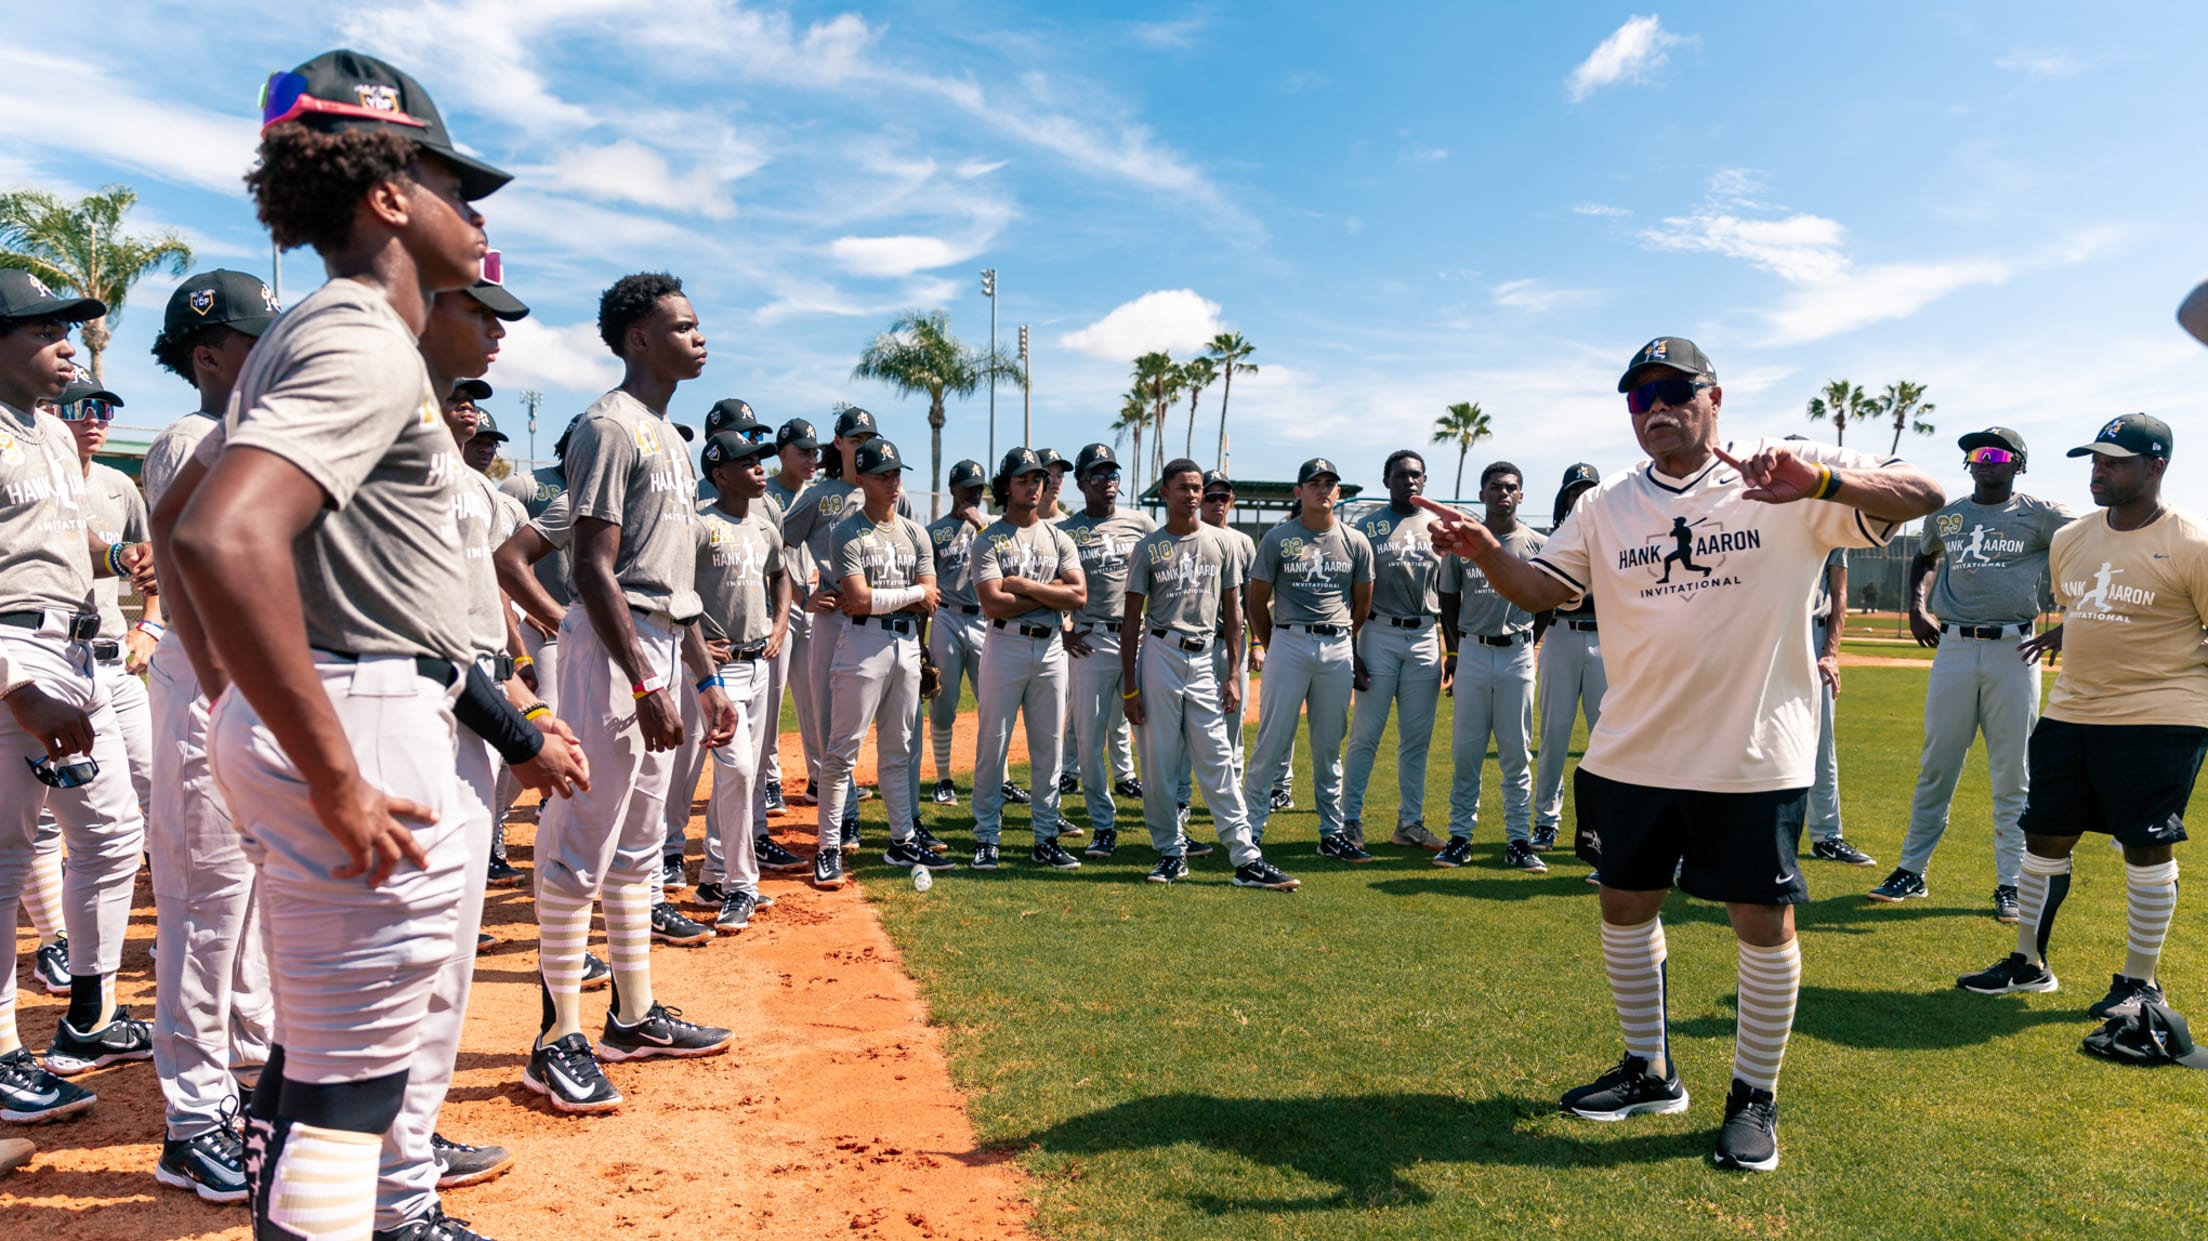 Marlins focus on youth for Jackie Robinson Day